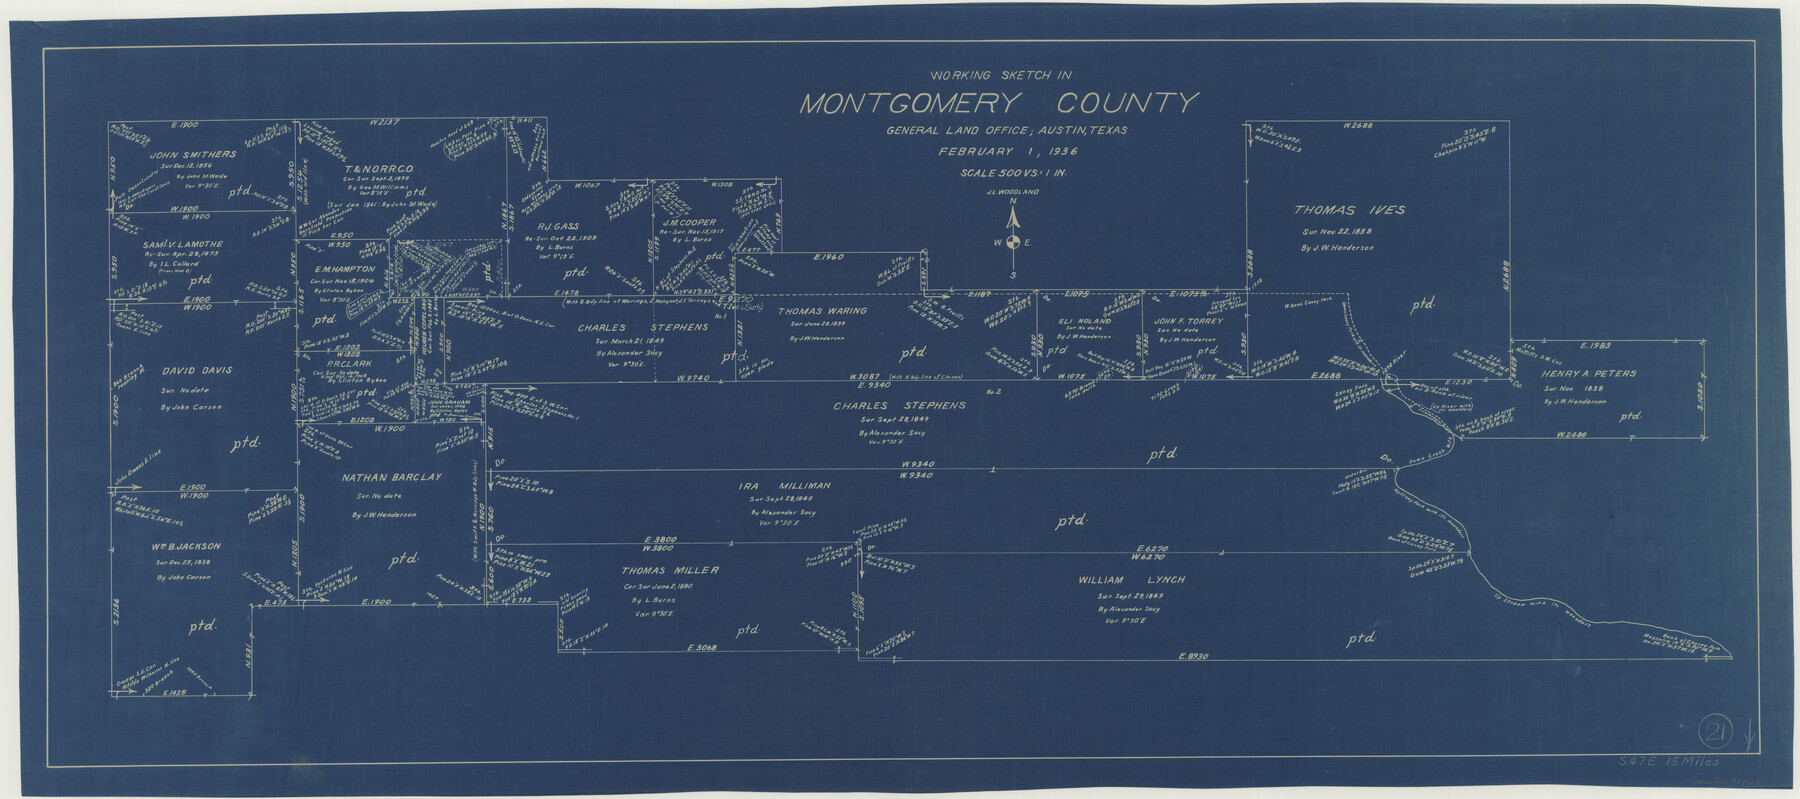 71128, Montgomery County Working Sketch 21, General Map Collection